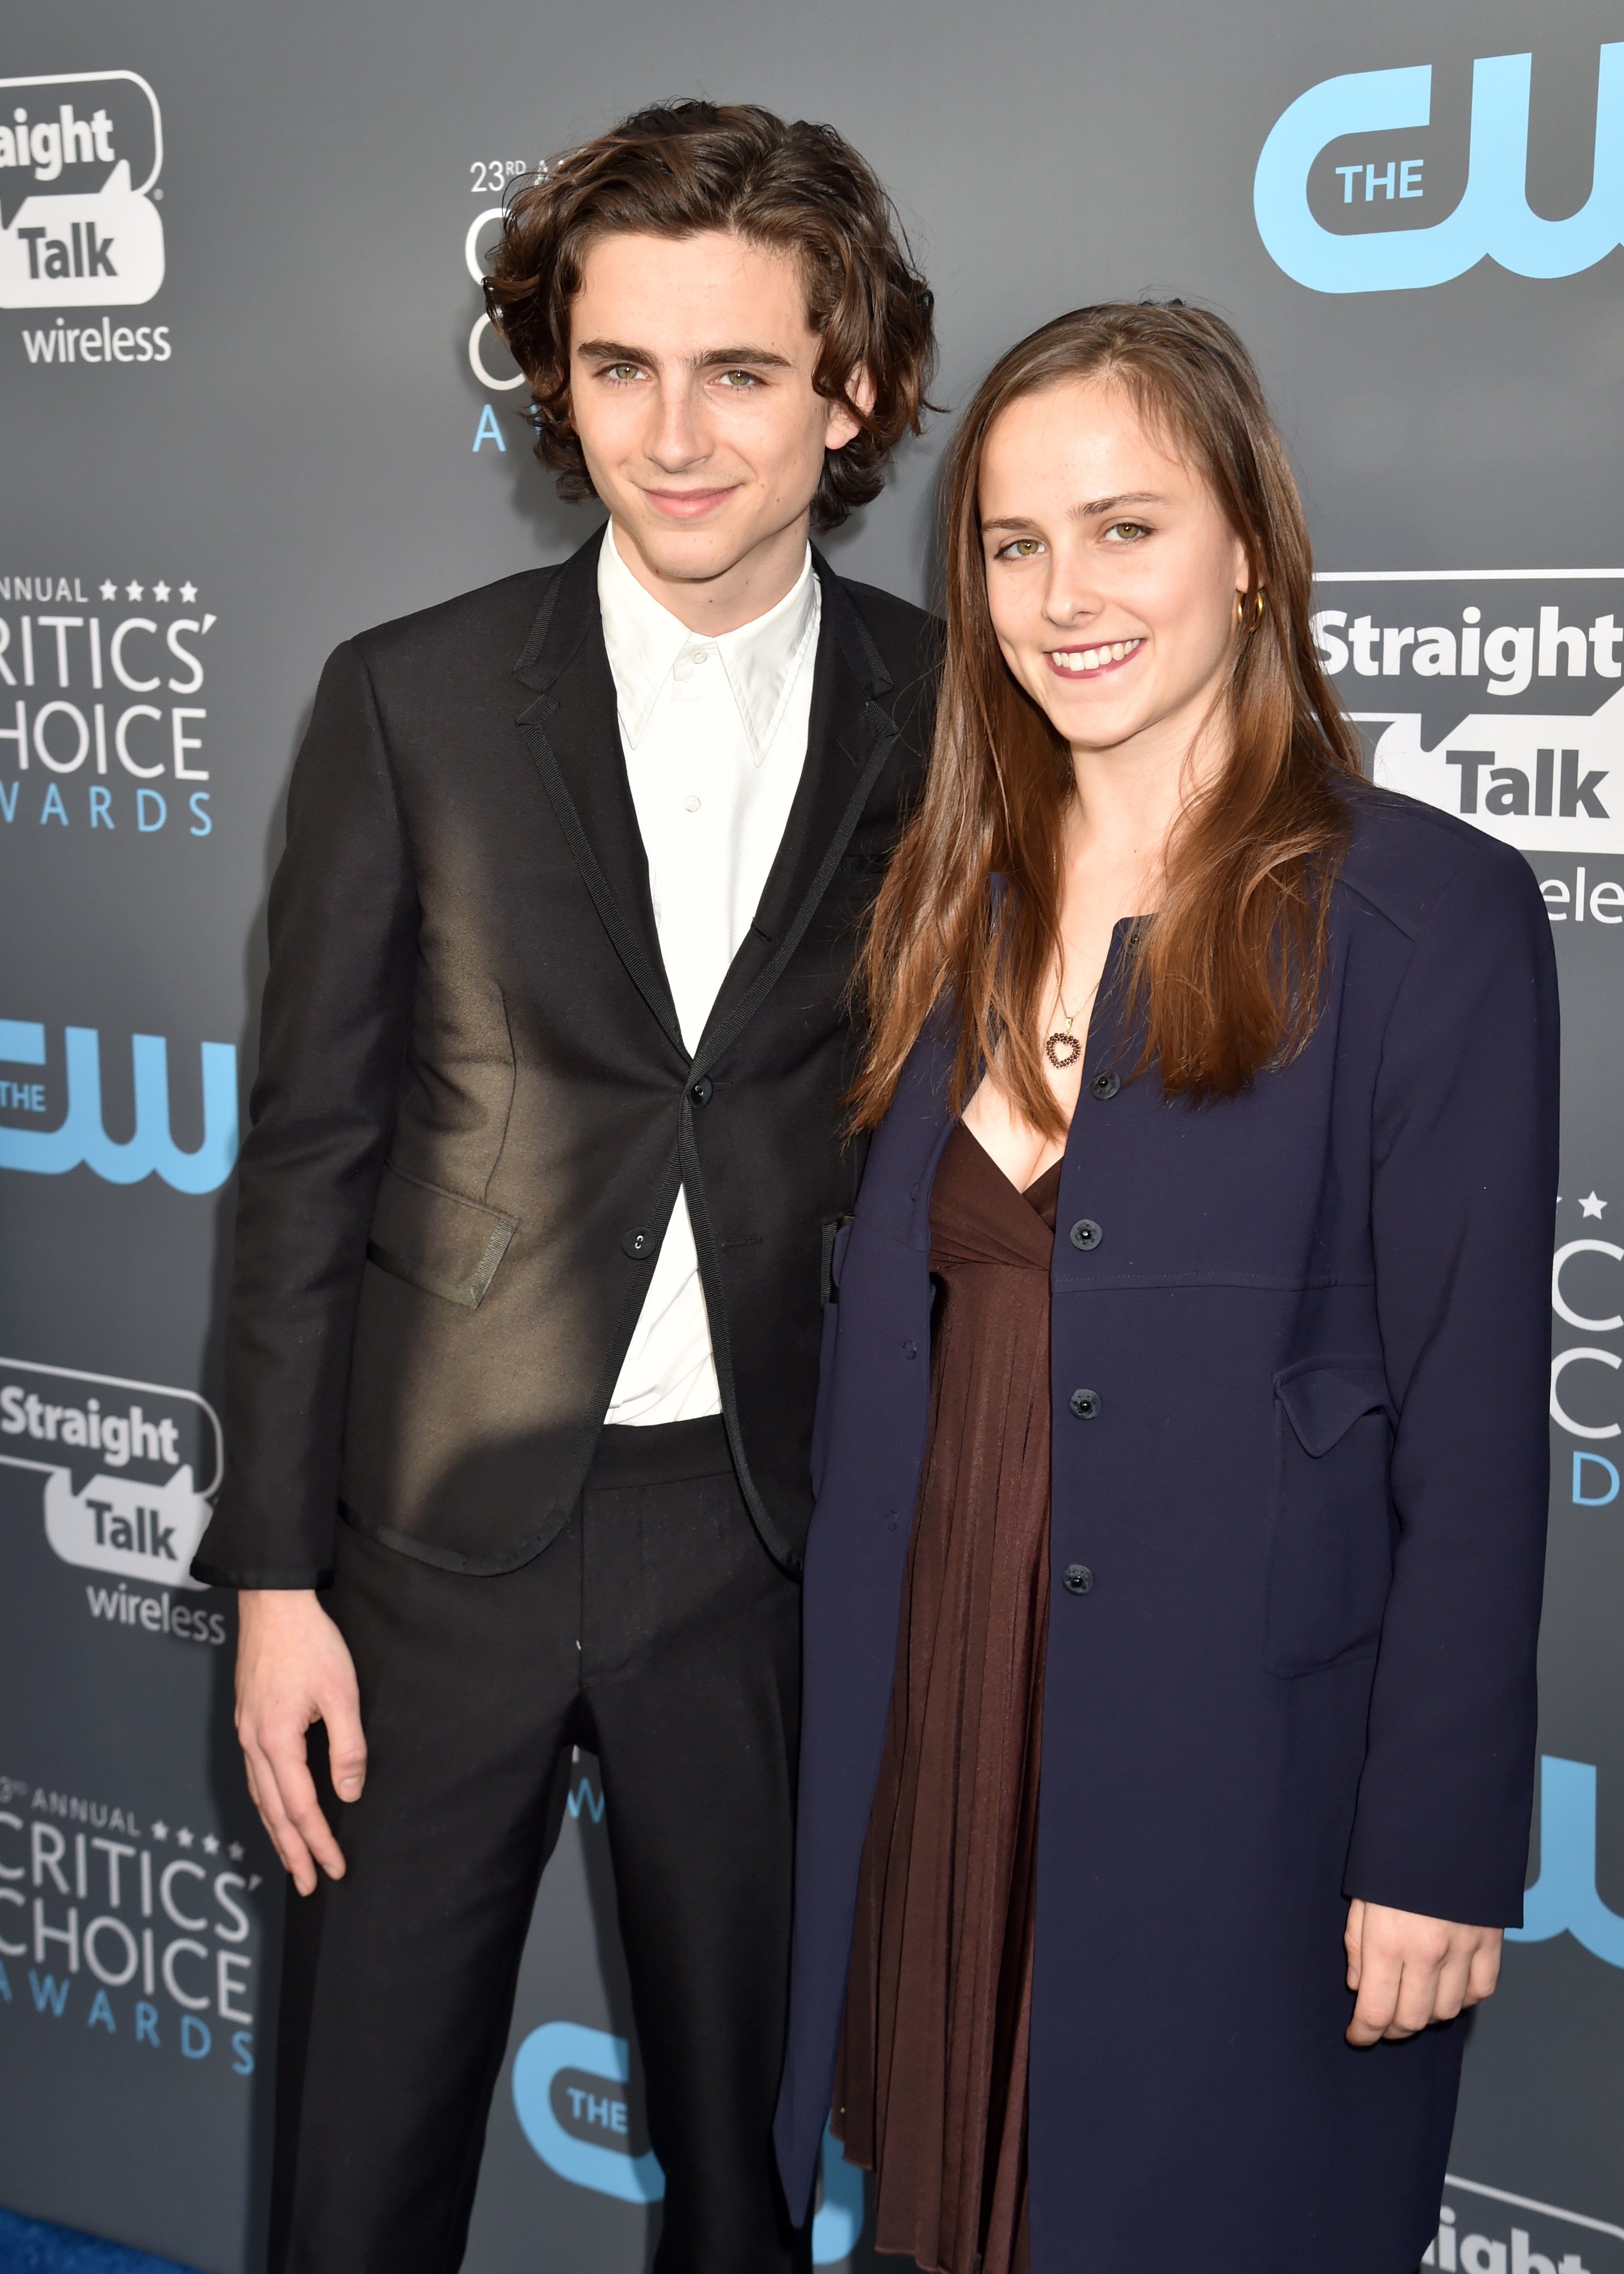 Timothée Chalamet and his sister Pauline Chalamet attend The 23rd Annual Critics' Choice Awards at Barker Hangar on January 11, 2018, in Santa Monica, California. | Source: Getty Images